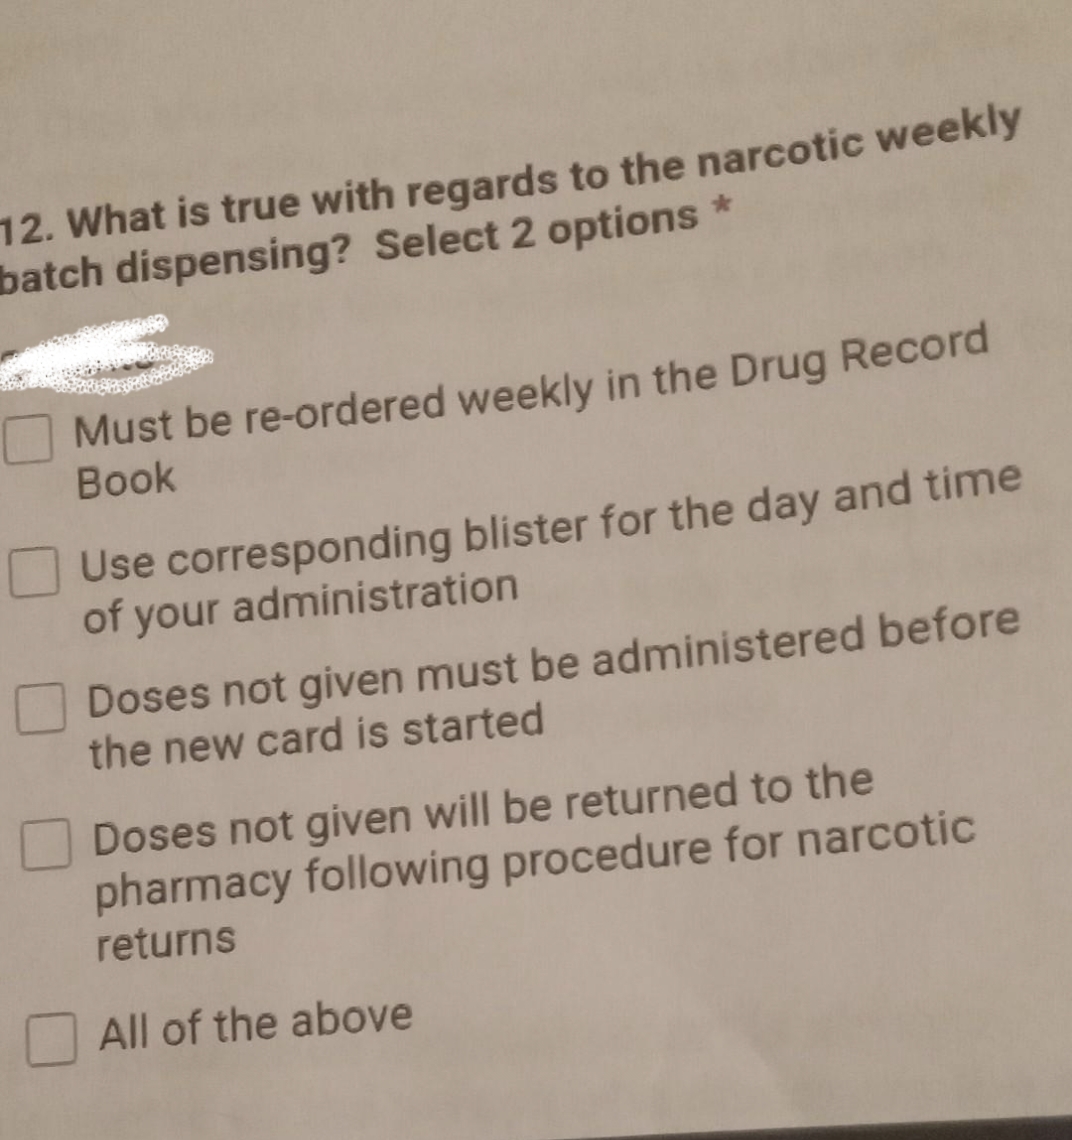 12. What is true with regards to the narcotic weekly
batch dispensing? Select 2 options *
Must be re-ordered weekly in the Drug Record
Book
Use corresponding blister for the day and time
of your administration
Doses not given must be administered before
the new card is started
Doses not given will be returned to the
pharmacy following procedure for narcotic
returns
All of the above